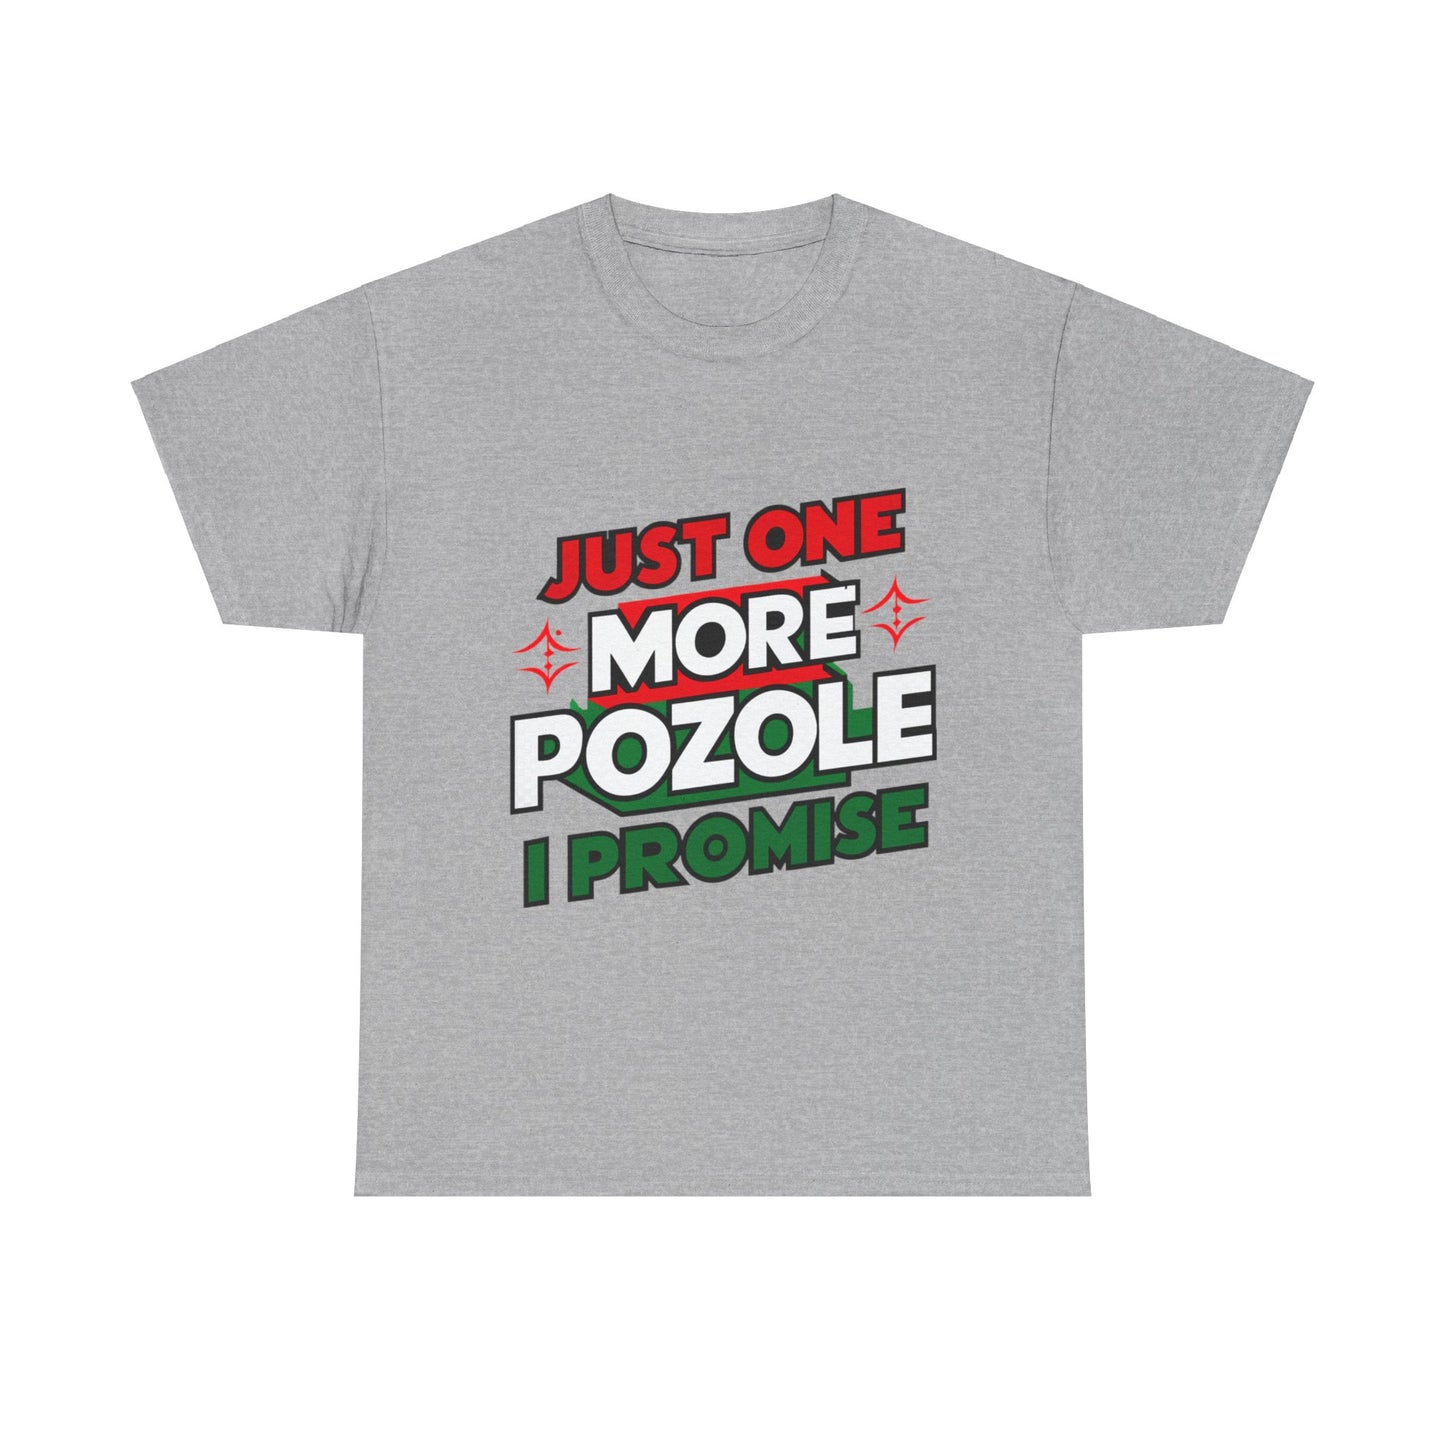 Just One More Pozole I Promise Mexican Food Graphic Unisex Heavy Cotton Tee Cotton Funny Humorous Graphic Soft Premium Unisex Men Women Sport Grey T-shirt Birthday Gift-9